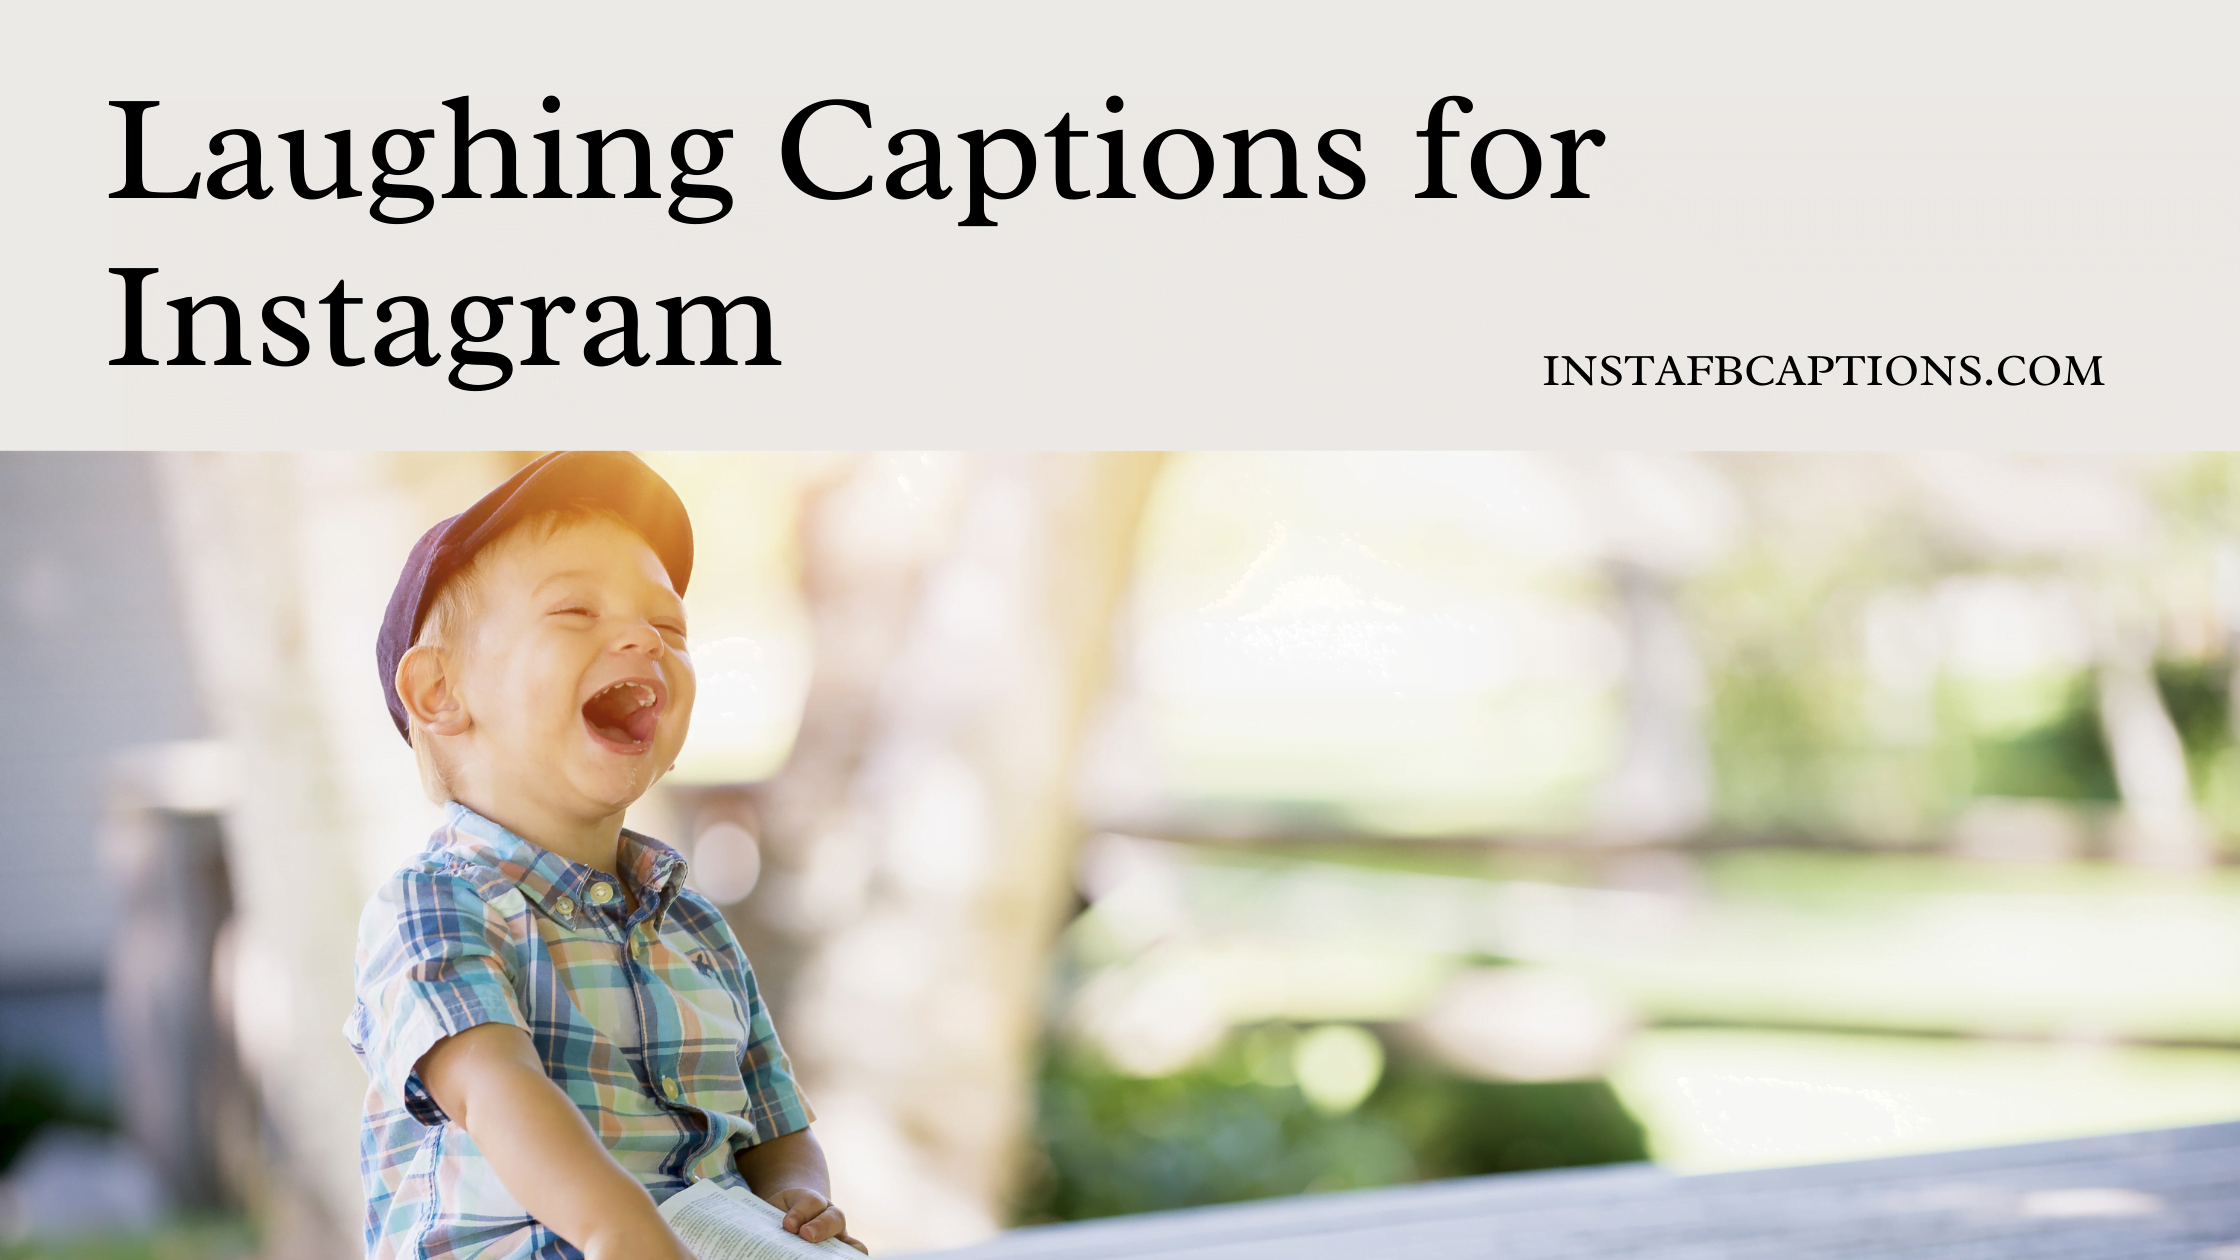 Laughing Captions For Instagram  - Laughing Captions for Instagram - 92 Funny Laughing Instagram Captions in 2023